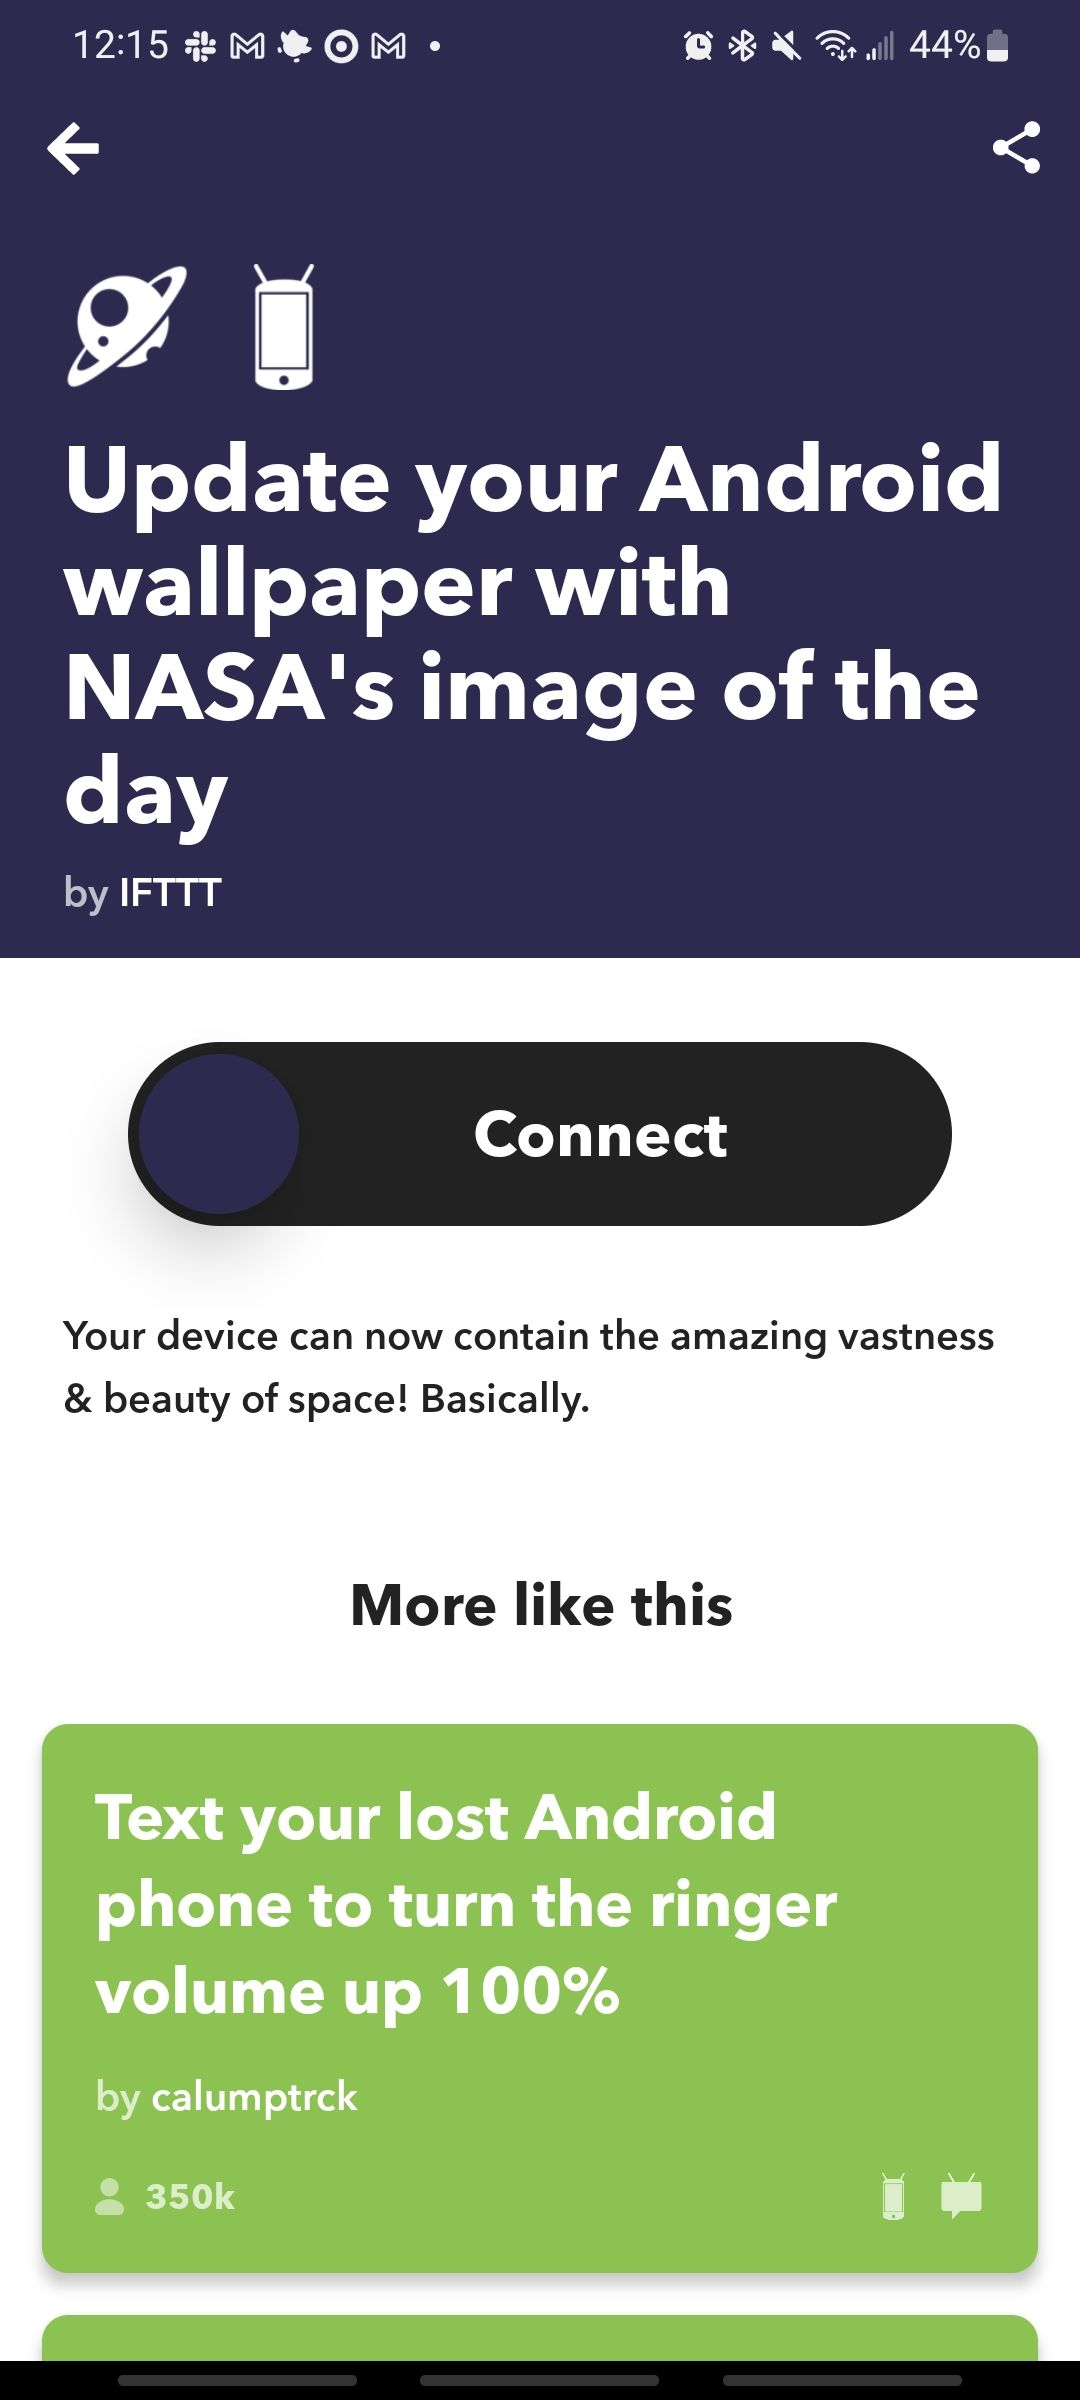 update your android wallpaper with nasa's image of the day applet ifttt